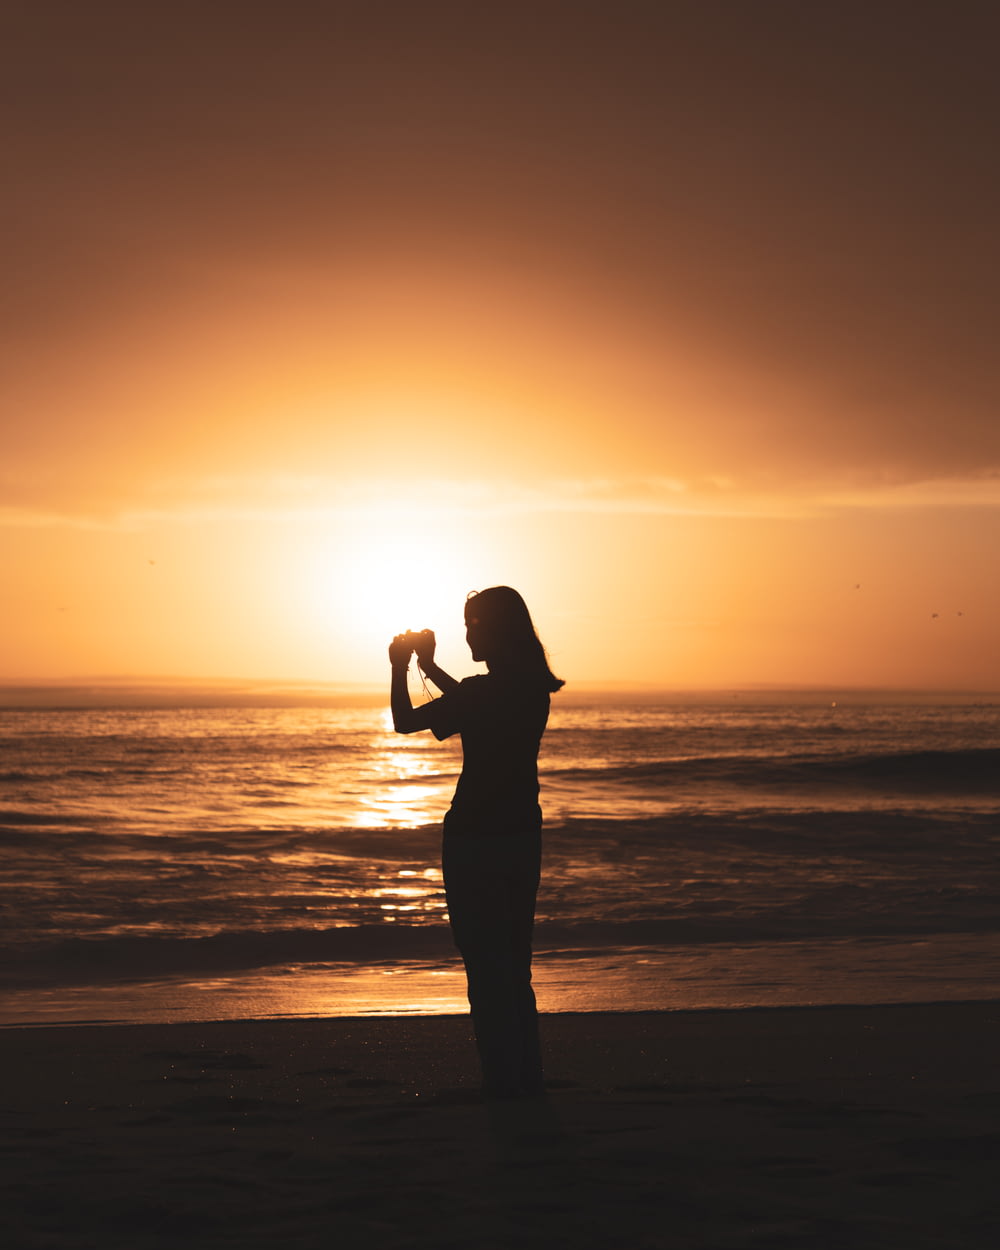 a person holding a baby on a beach at sunset